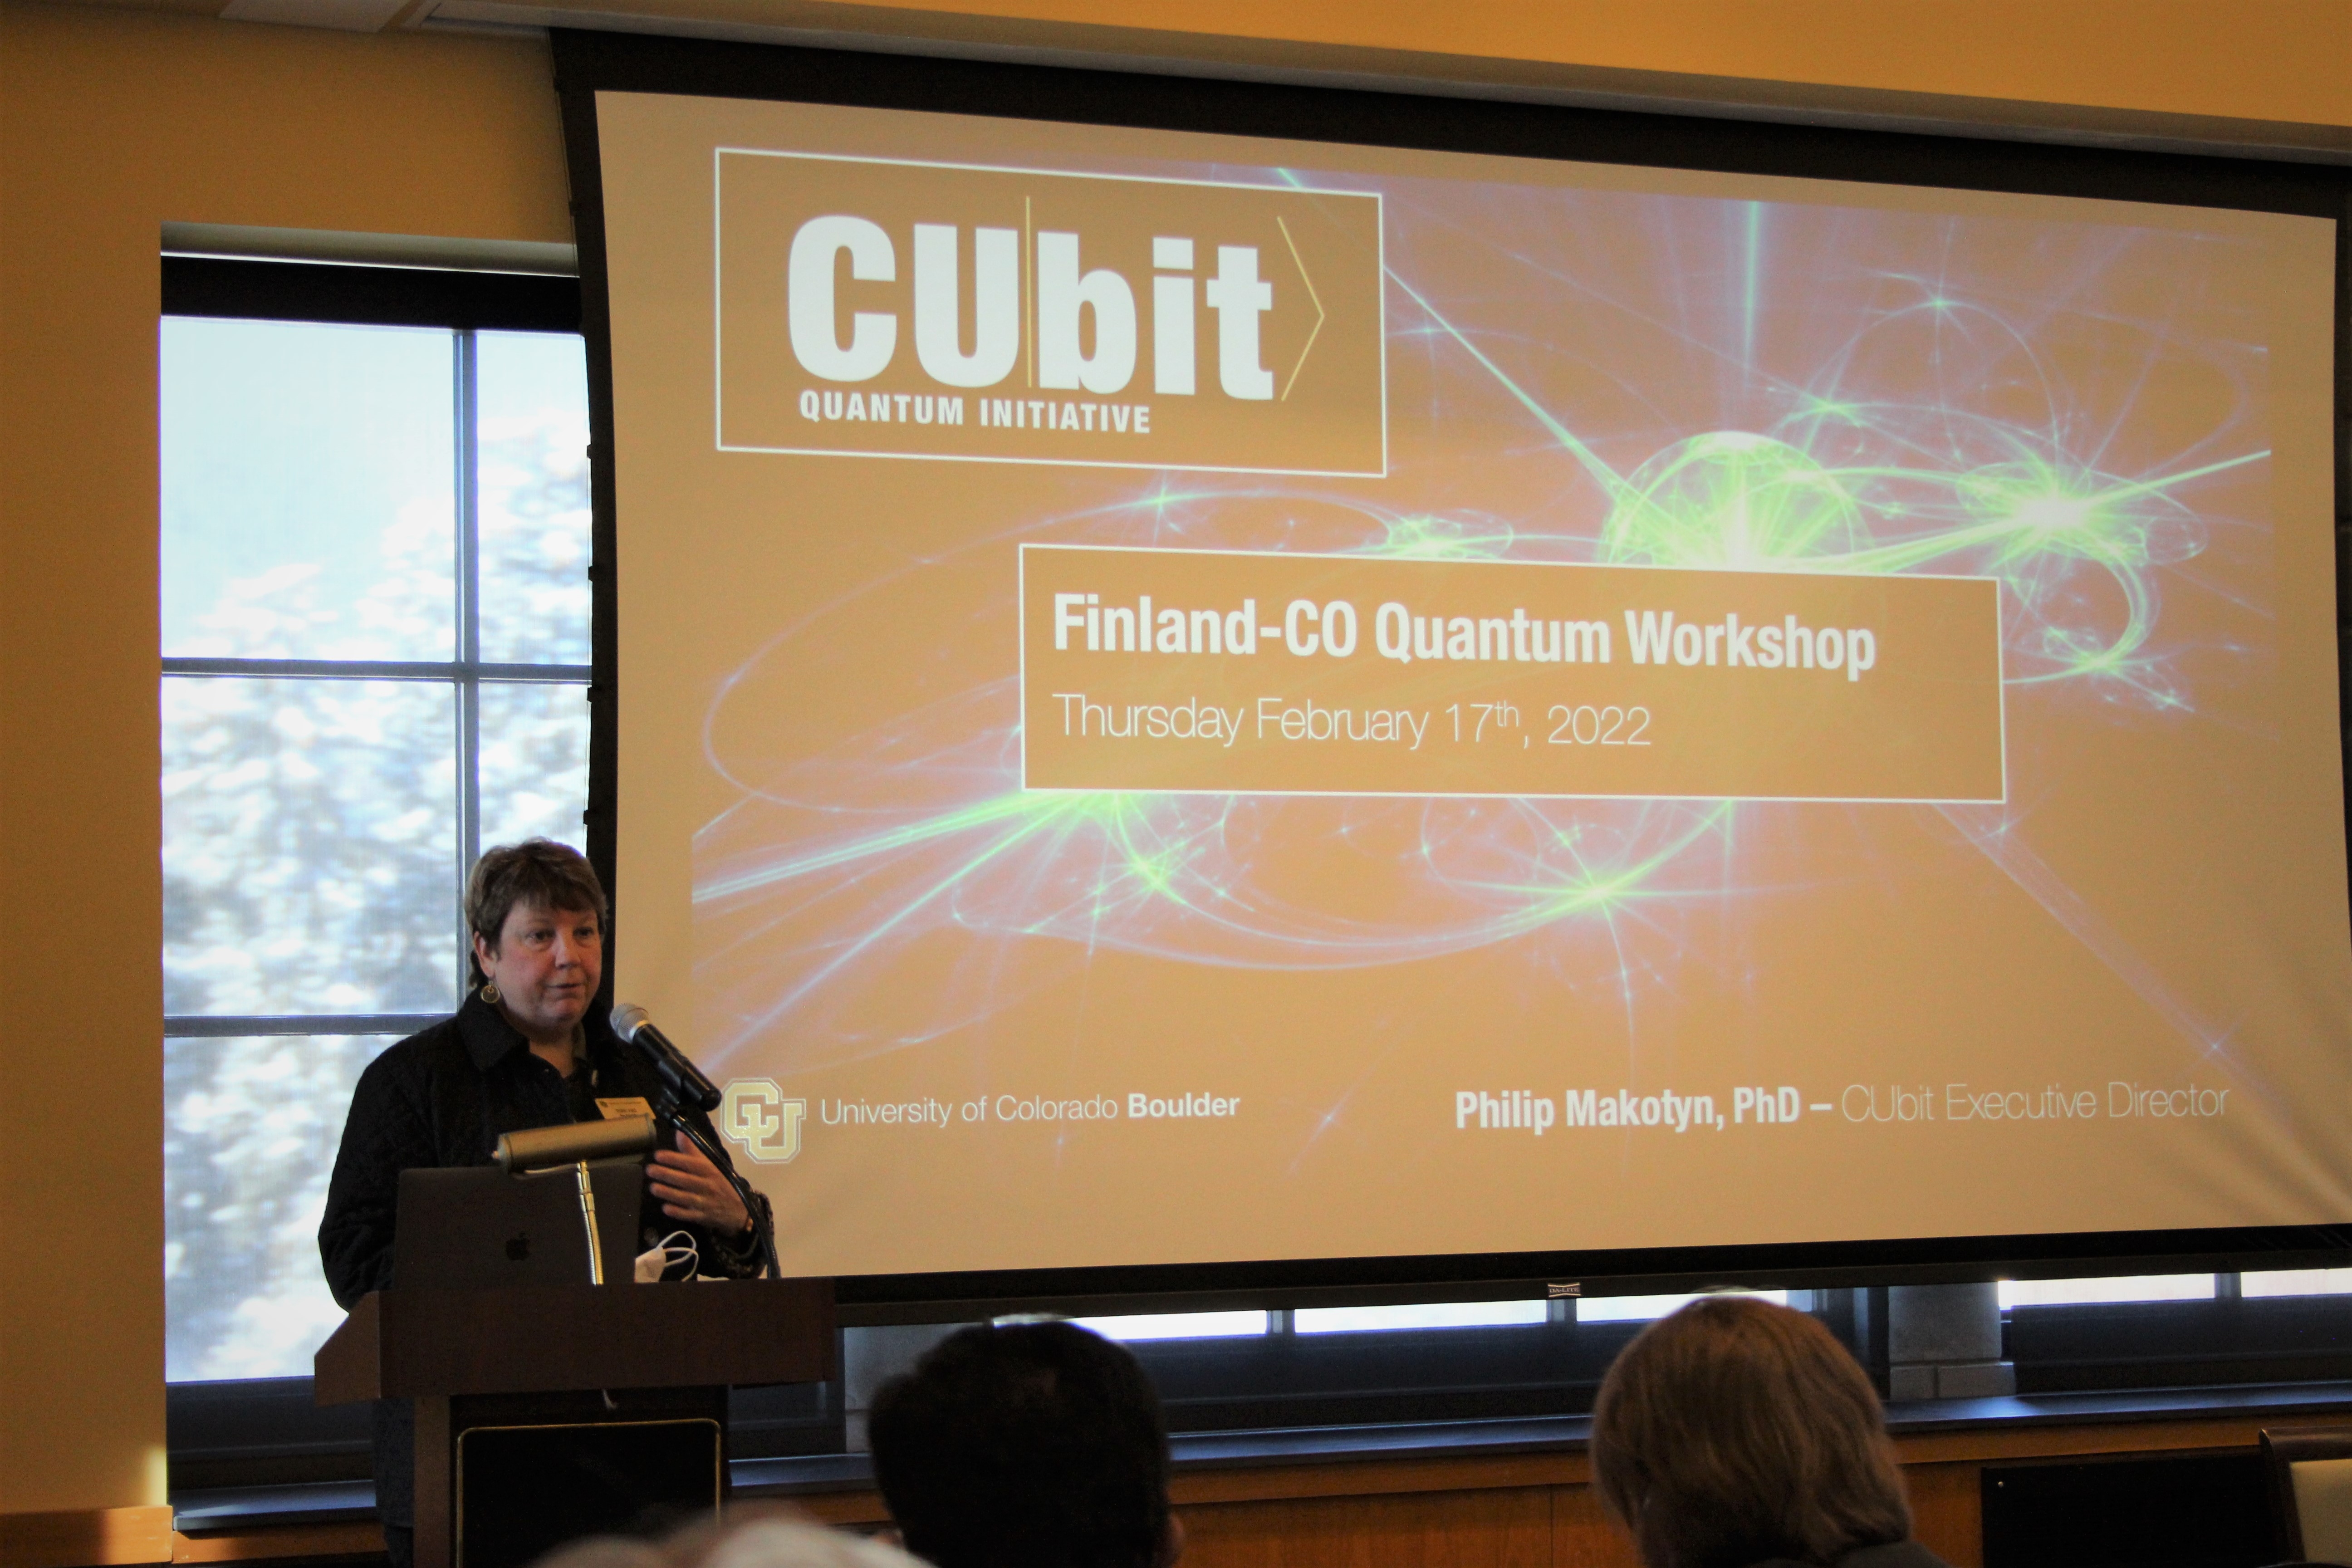 Terri Fiez, CU Boulder vice chancellor for research and innovation speaks at the workshop